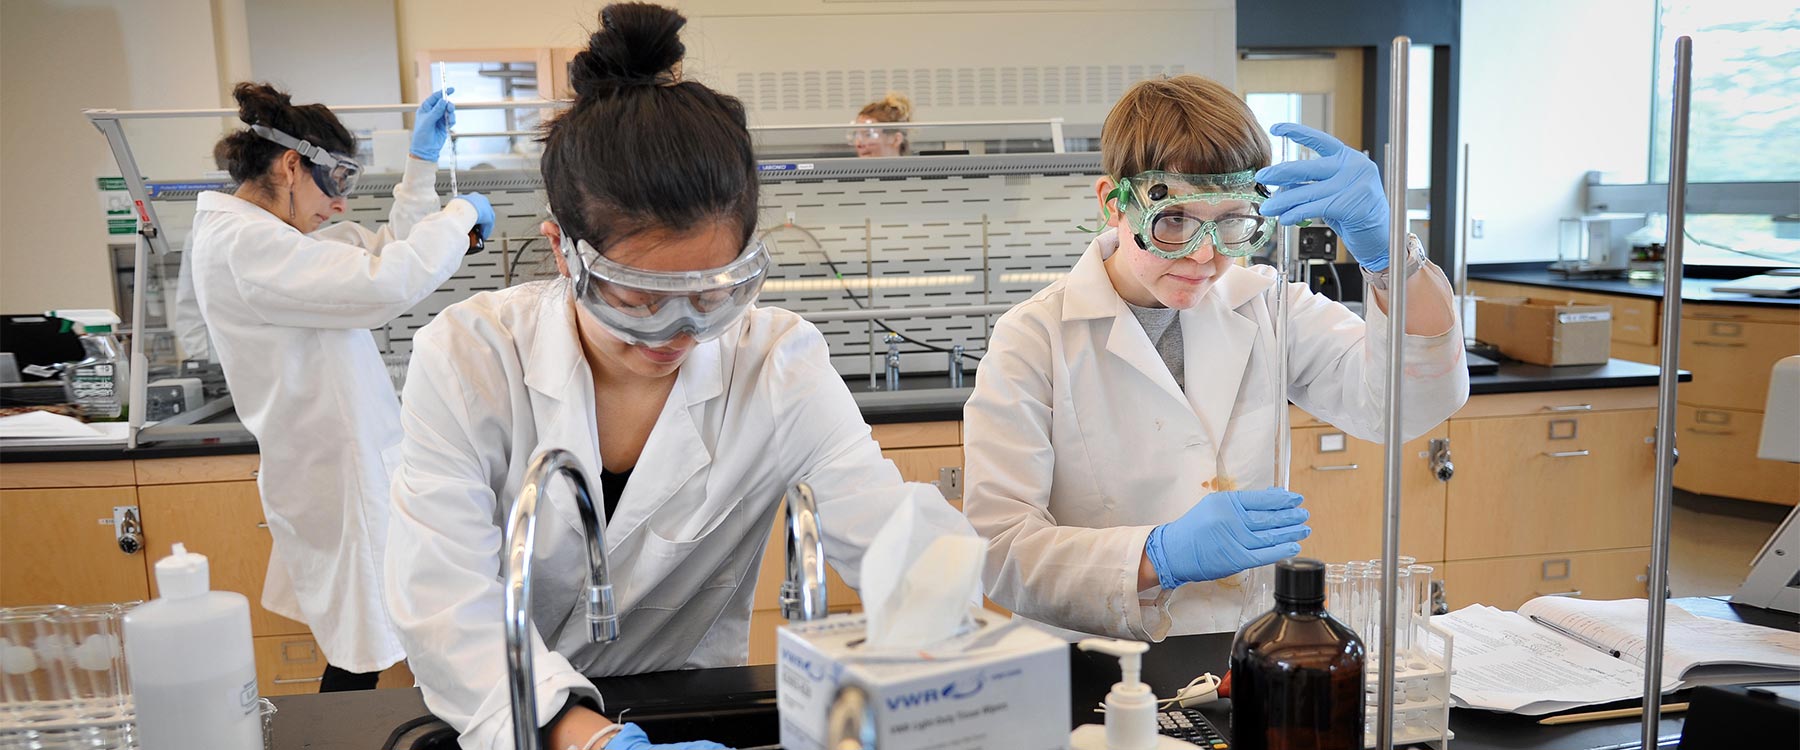 Students in a lab wearing white coats and goggles conducting experiments with various lab equipment.